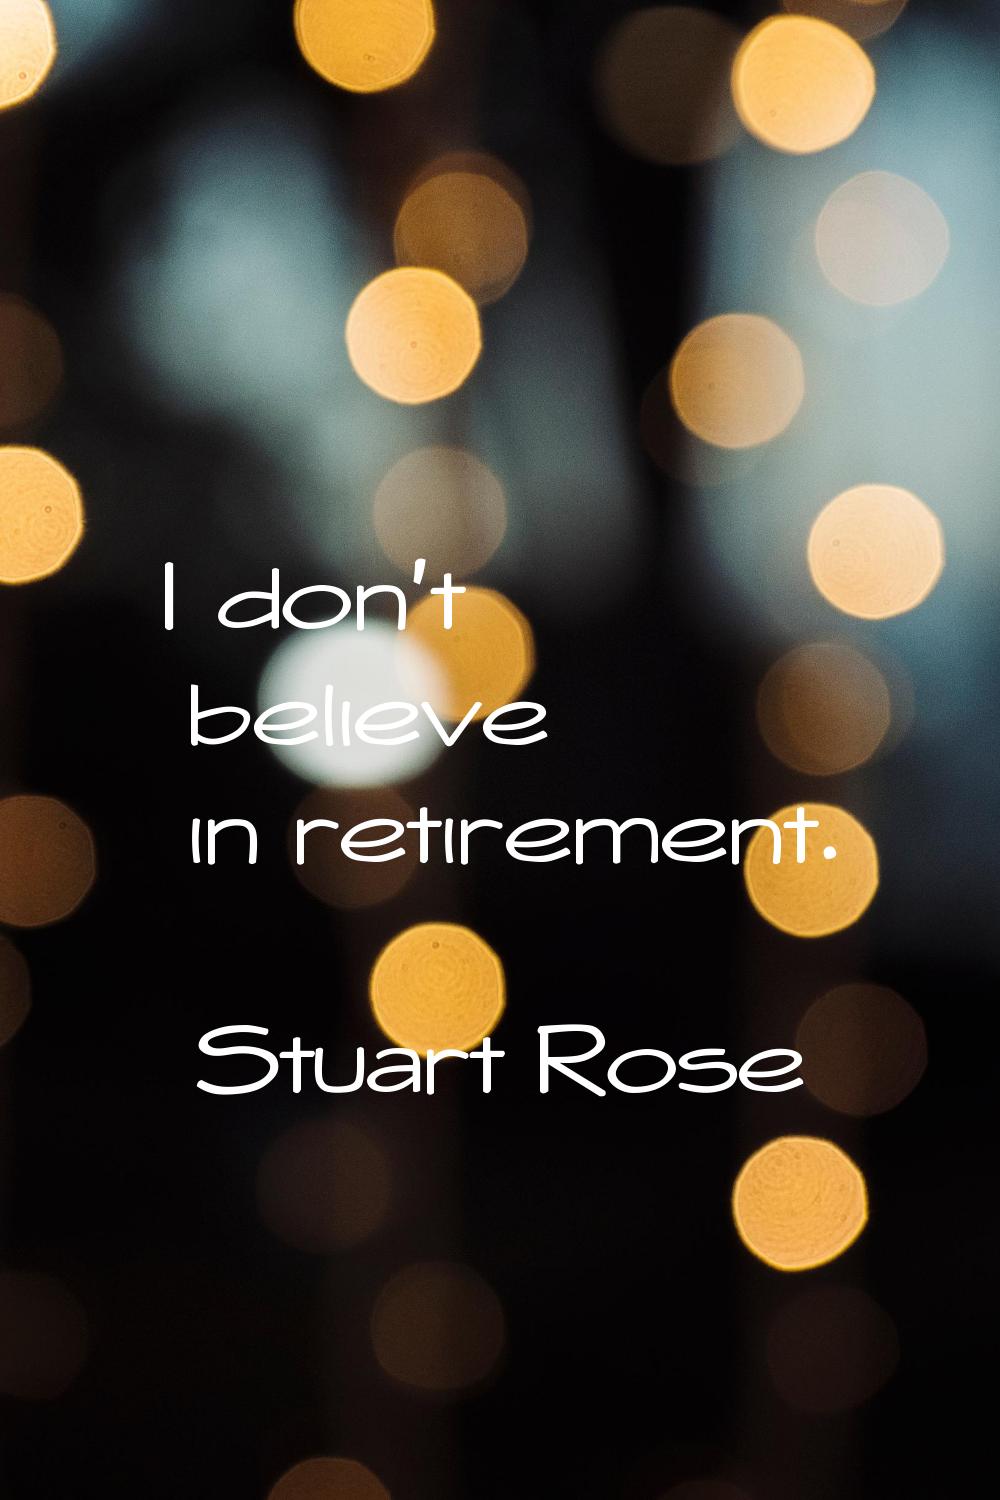 I don't believe in retirement.